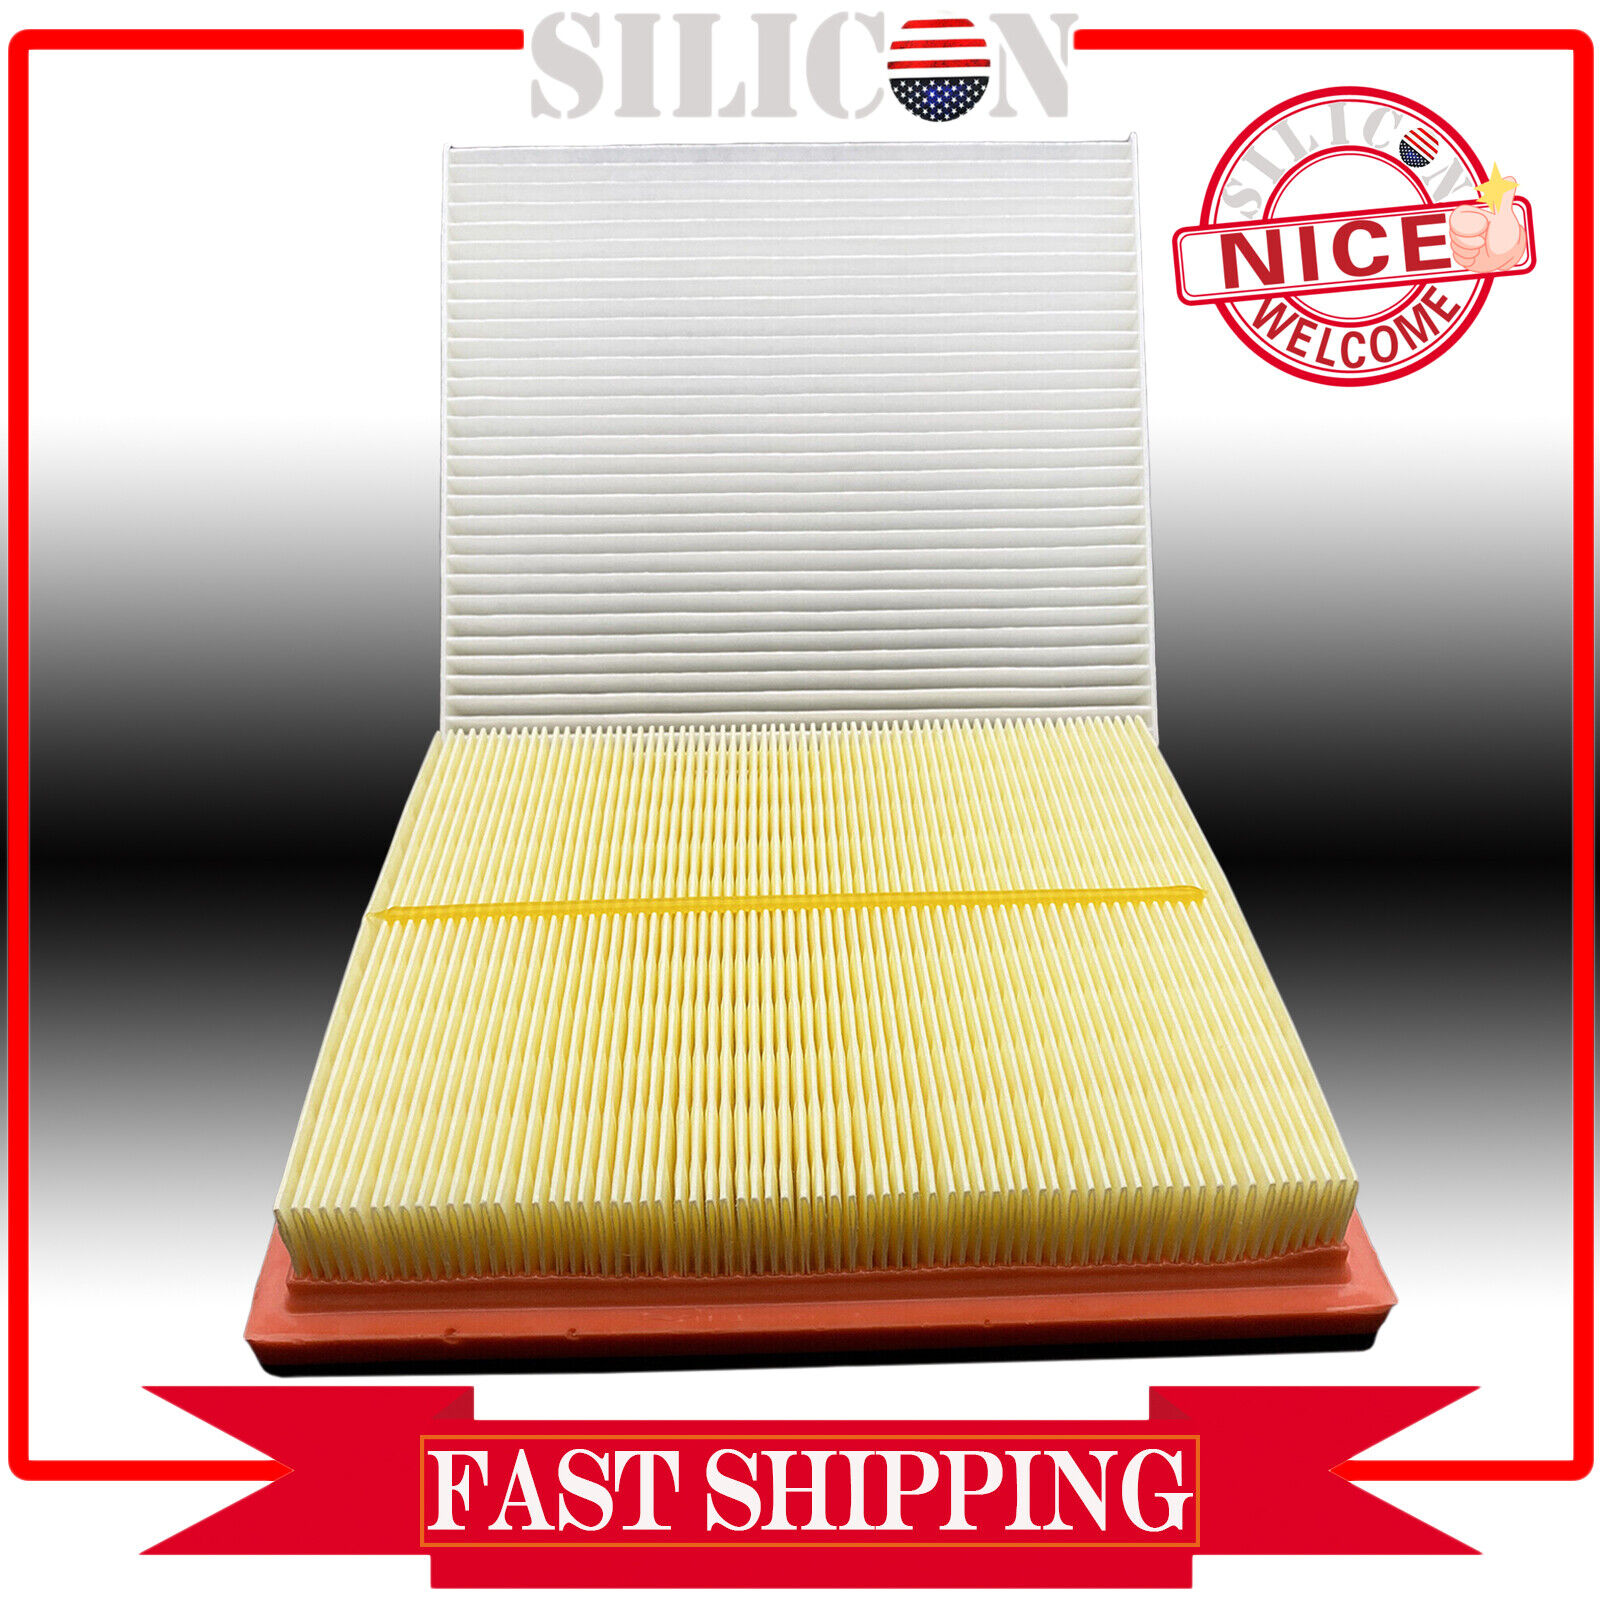 New ENGINE & CABIN AIR FILTER For PRIUS Hybrid PRIUS V CT200H NX300H 17801-37020